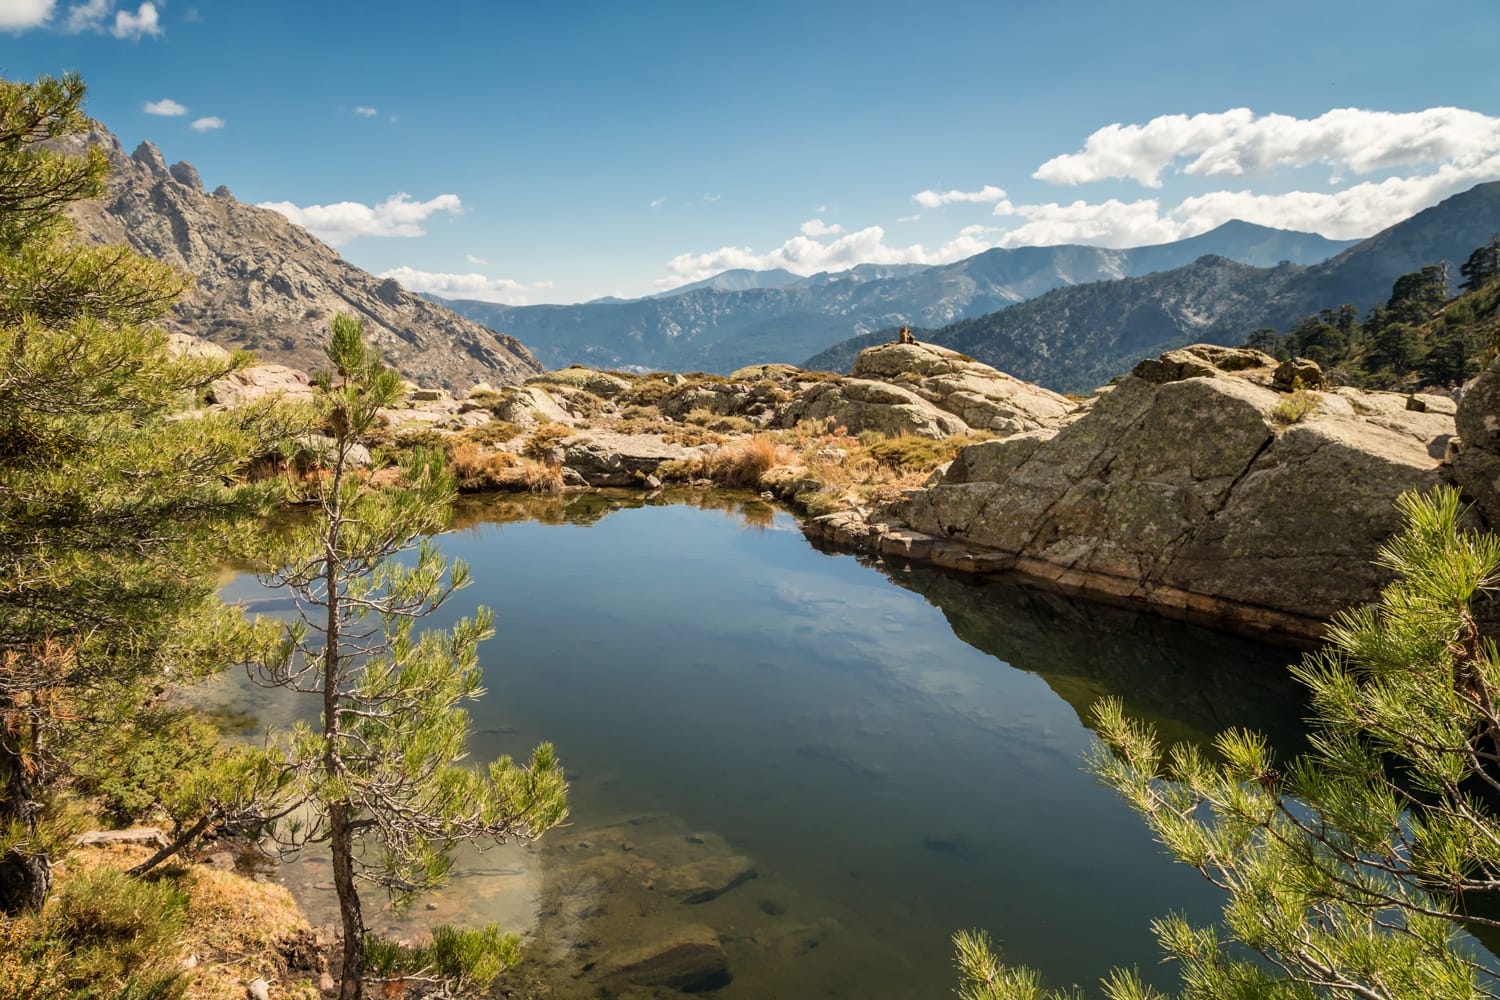 Small lake at Paglia Orba surrounded by rocks, pine trees and mountains near the GR20 hiking trail in central Corsica